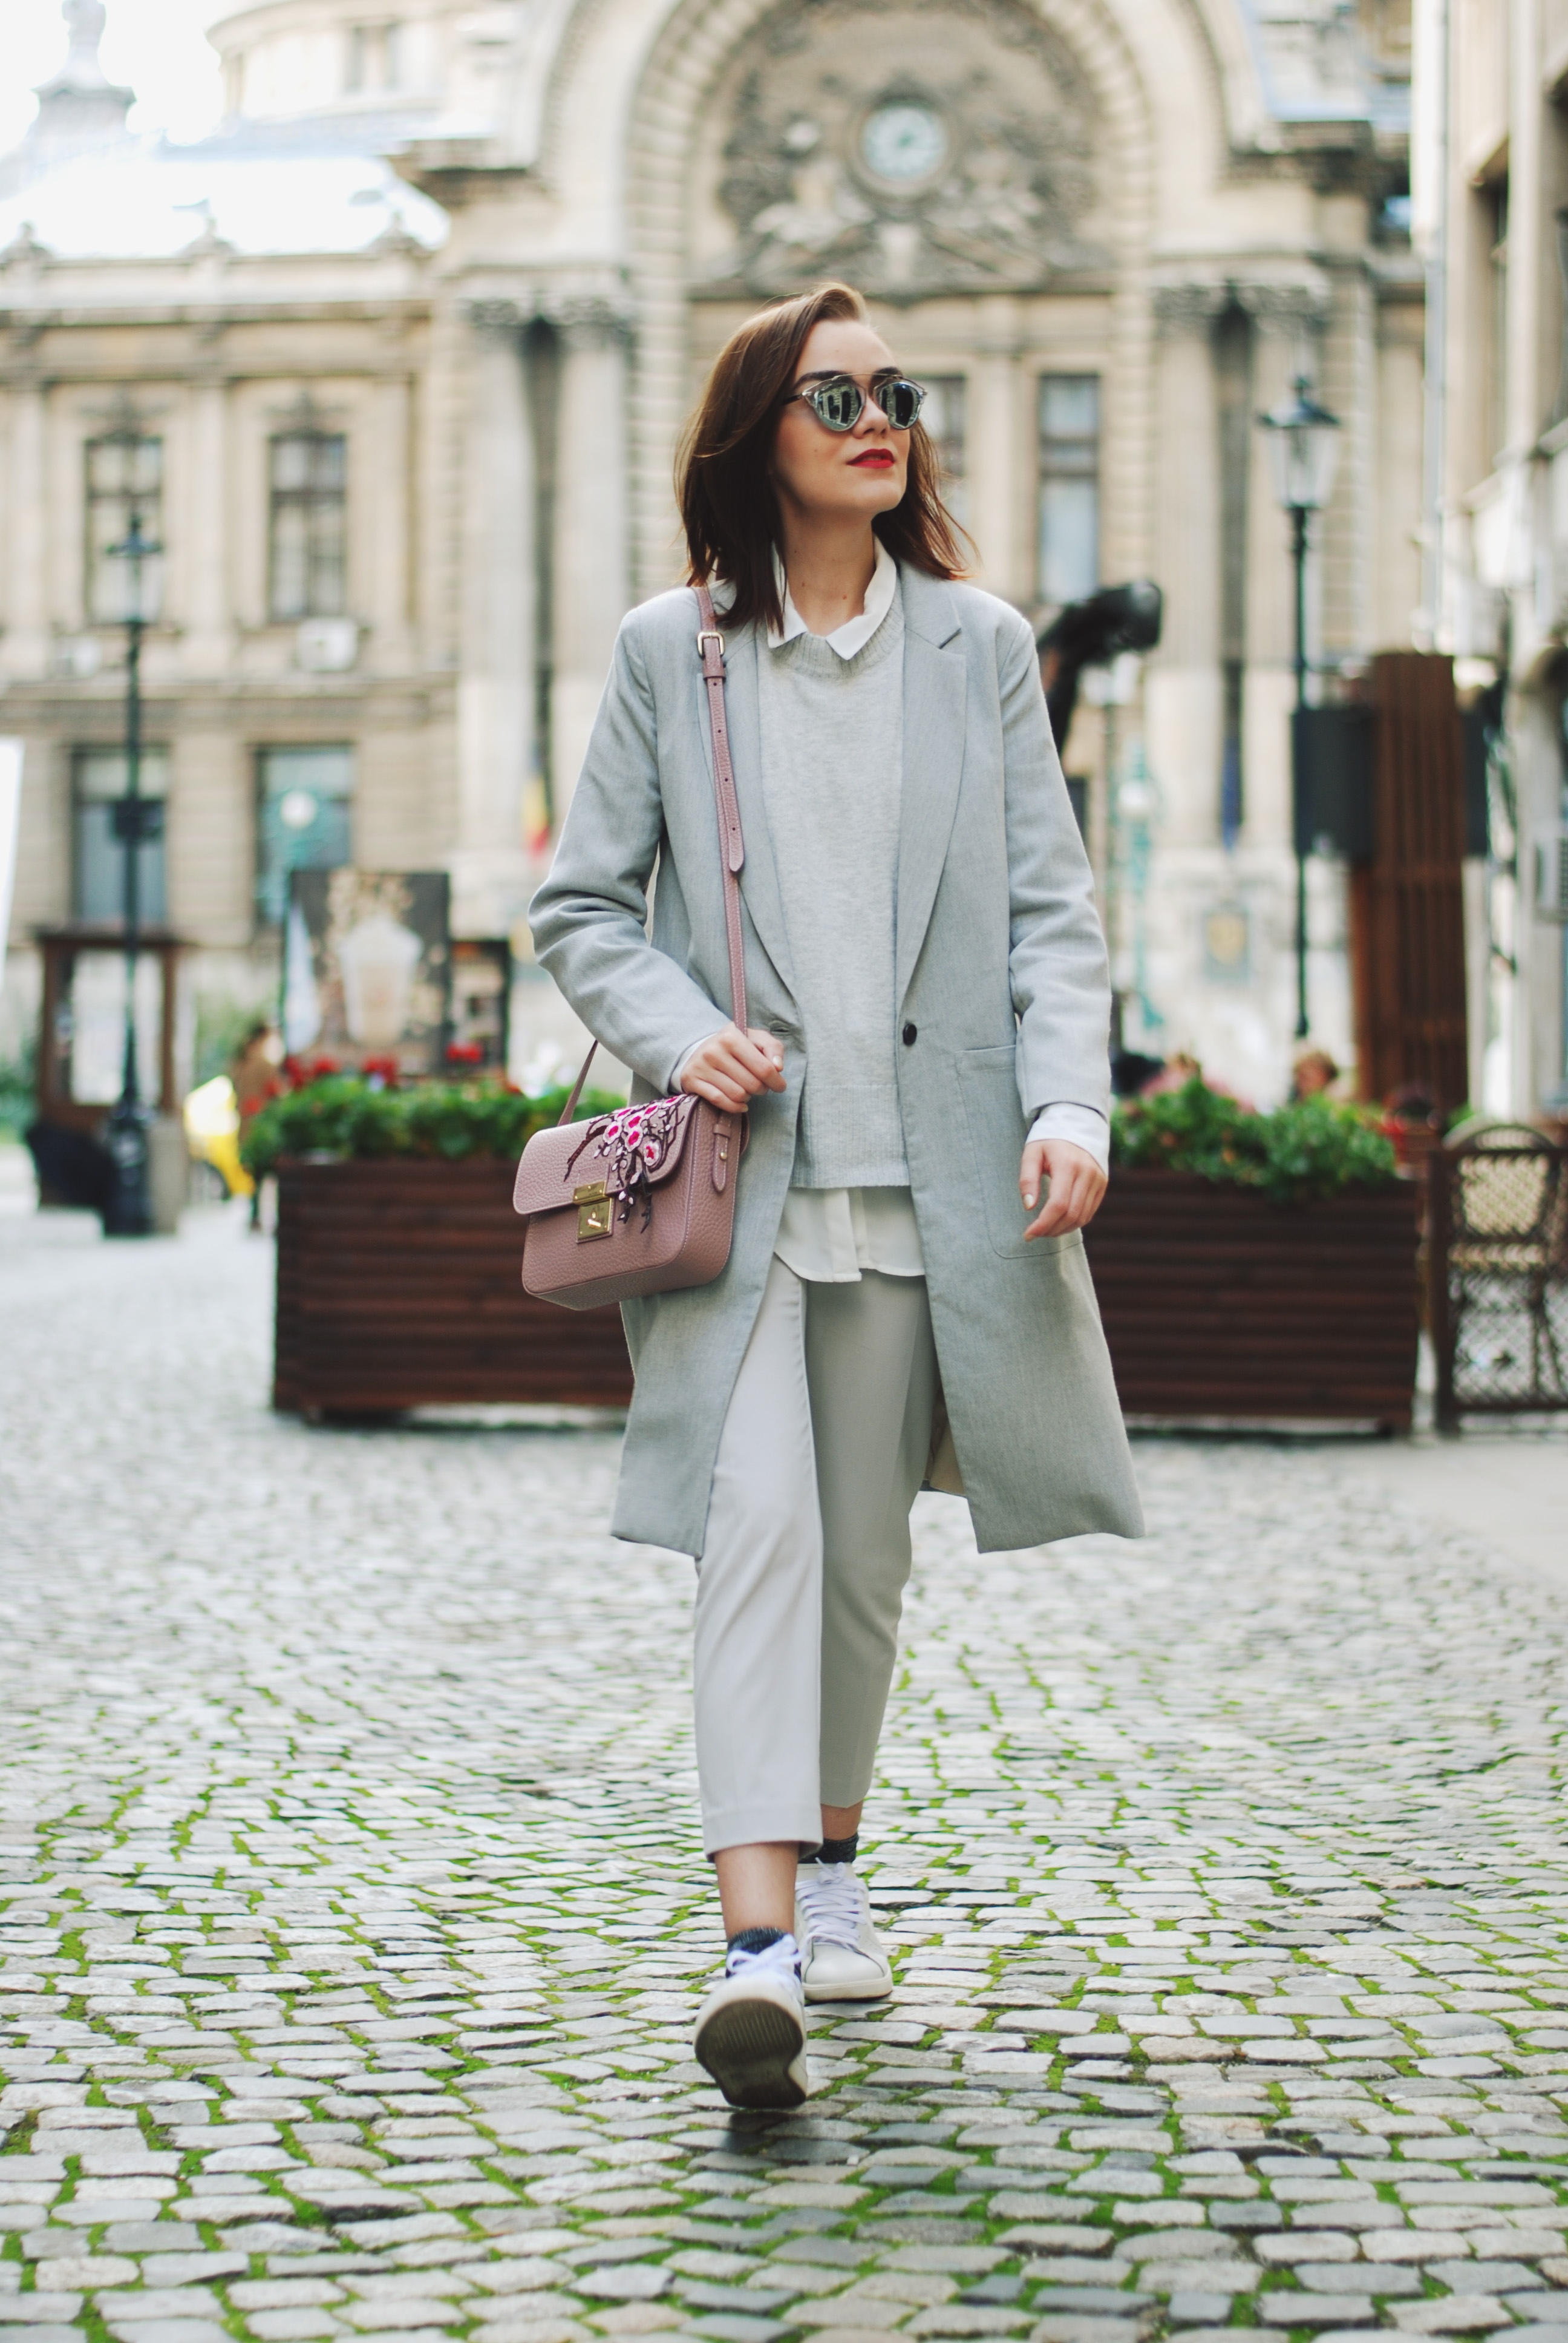 White shirt, grey pants trousers, grey sweater, grey coat, white sneakers, glitter socks, floral crossbody bag, all grey outfit for fall, Andreea Birsan